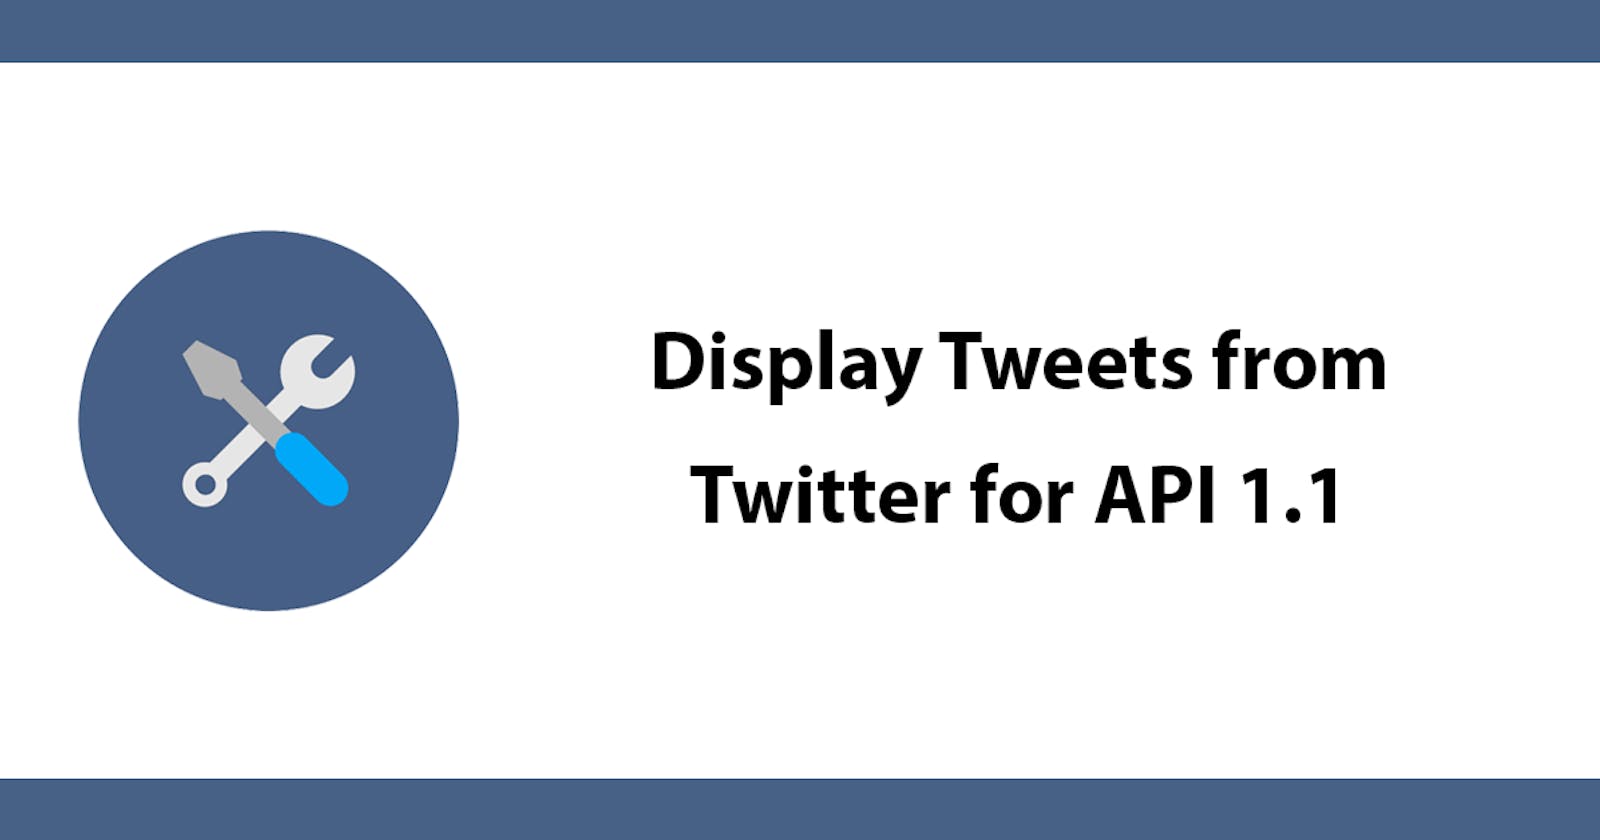 Display Tweets from Twitter for API 1.1